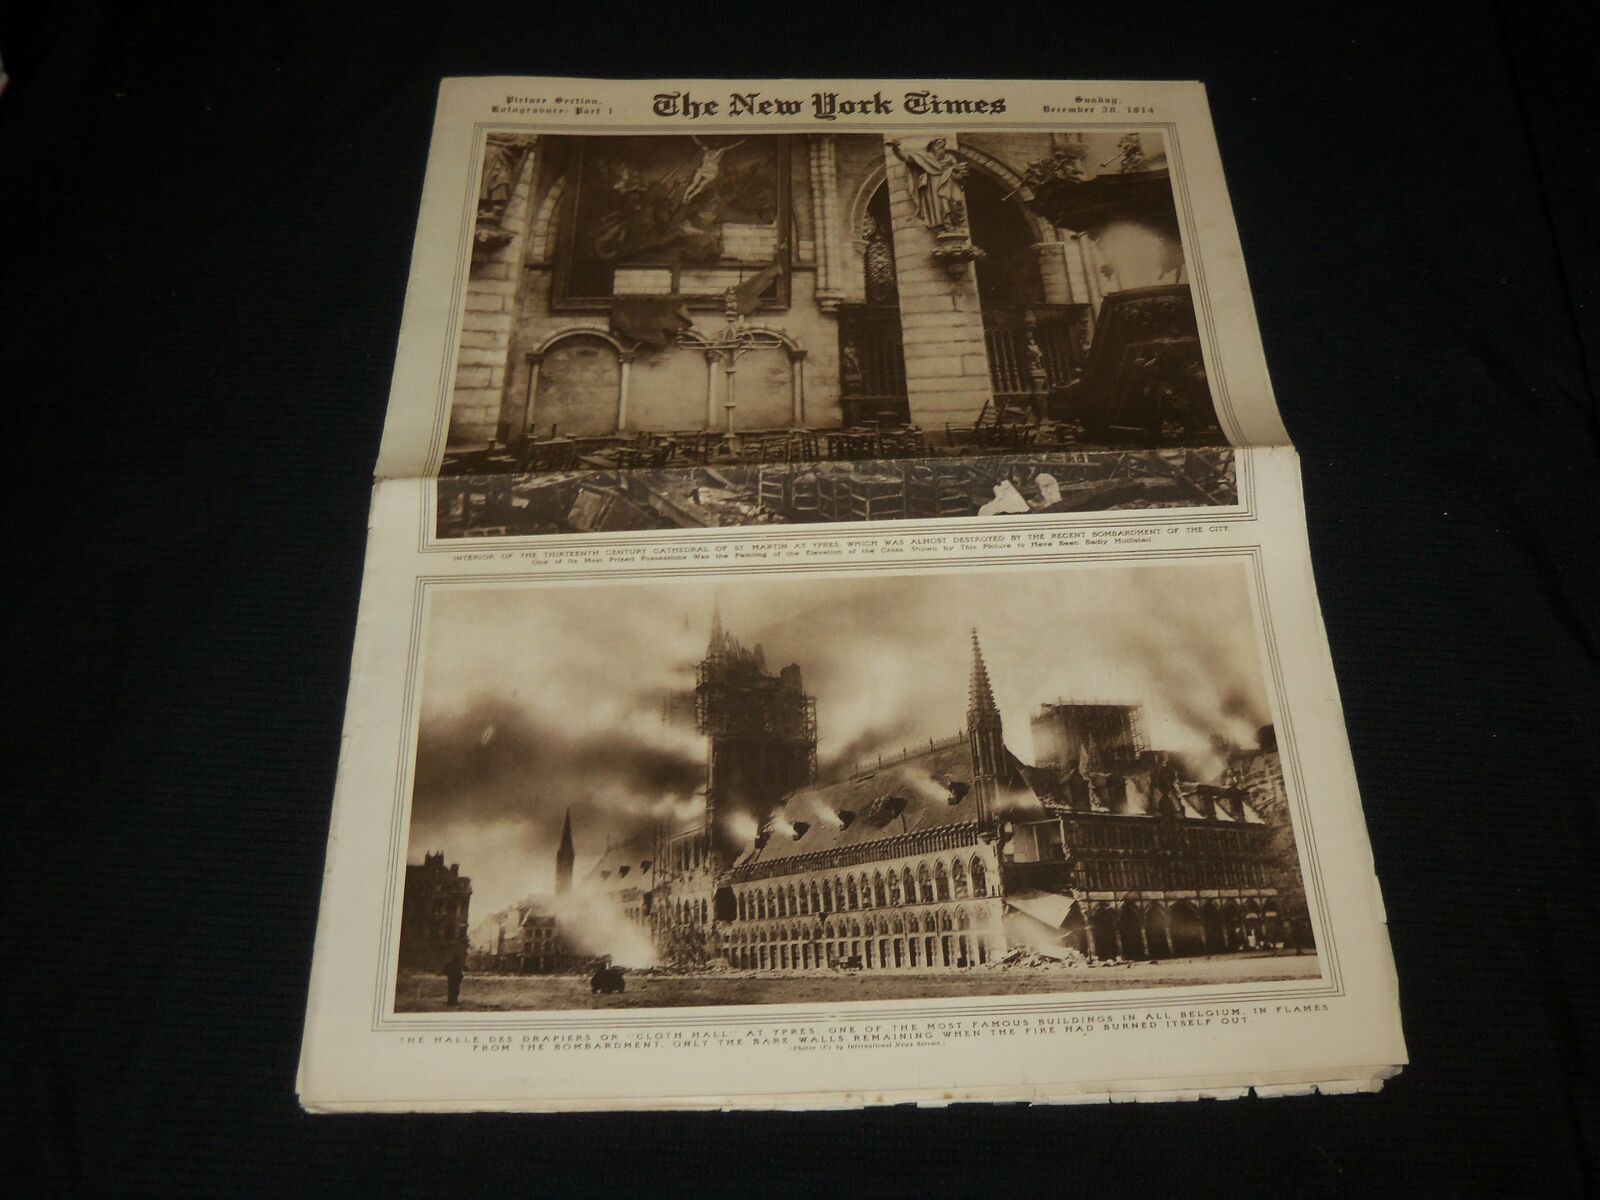 1914 DECEMBER 20 NEW YORK TIMES PICTURE SECTION - YPRES BELGIUM - NP 5608